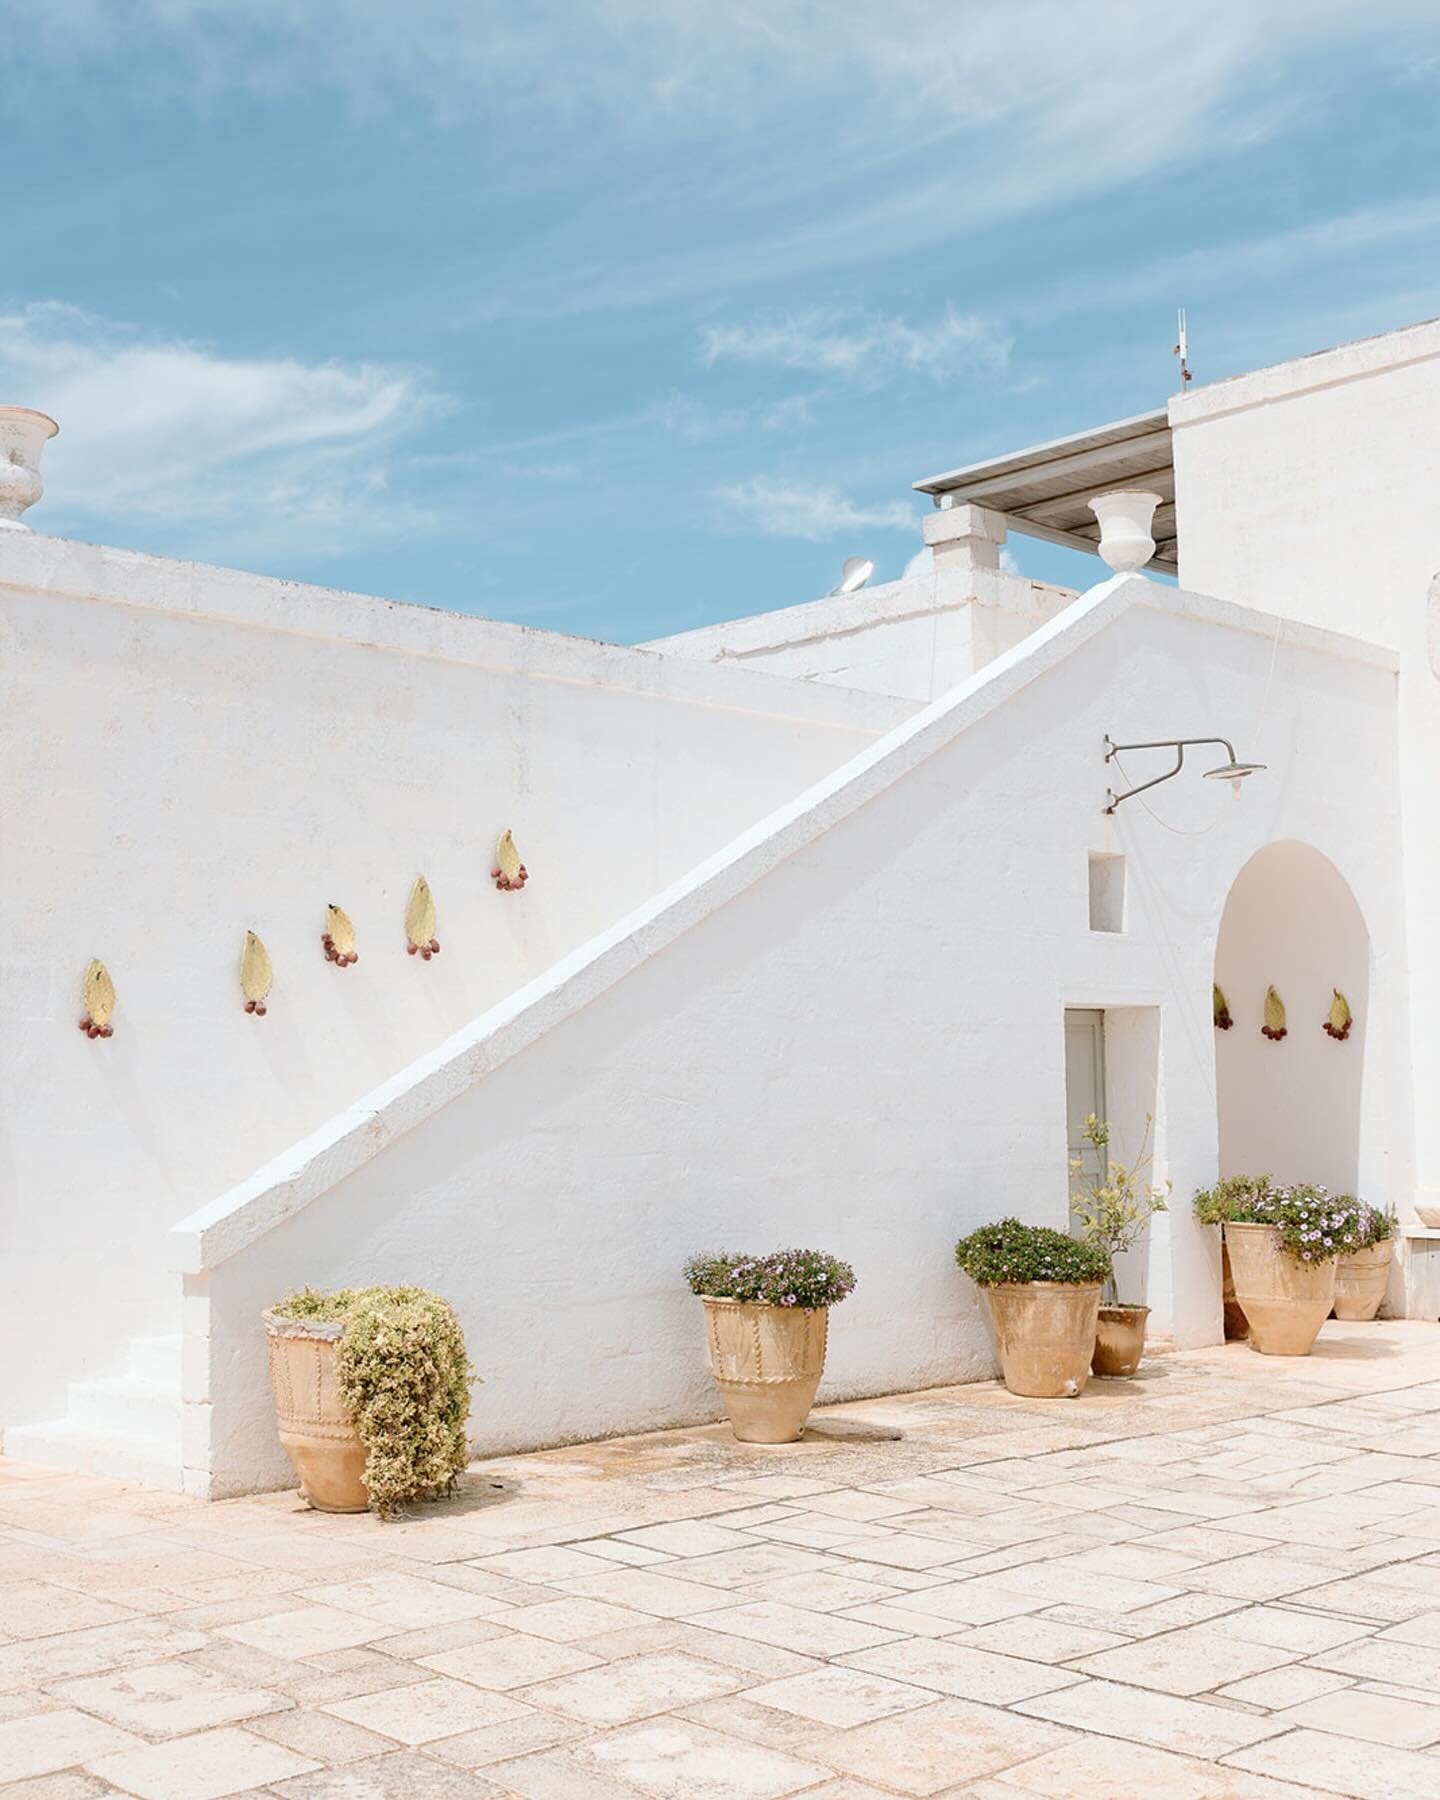 Editorial shoot in the most famous masseria in Puglia, @masseriapotenti, as envisioned by Matteo.

The location has its own vibe: it exudes history, it shows the love and care that Chiara and Maria Grazia put into every single detail and ultimately, 